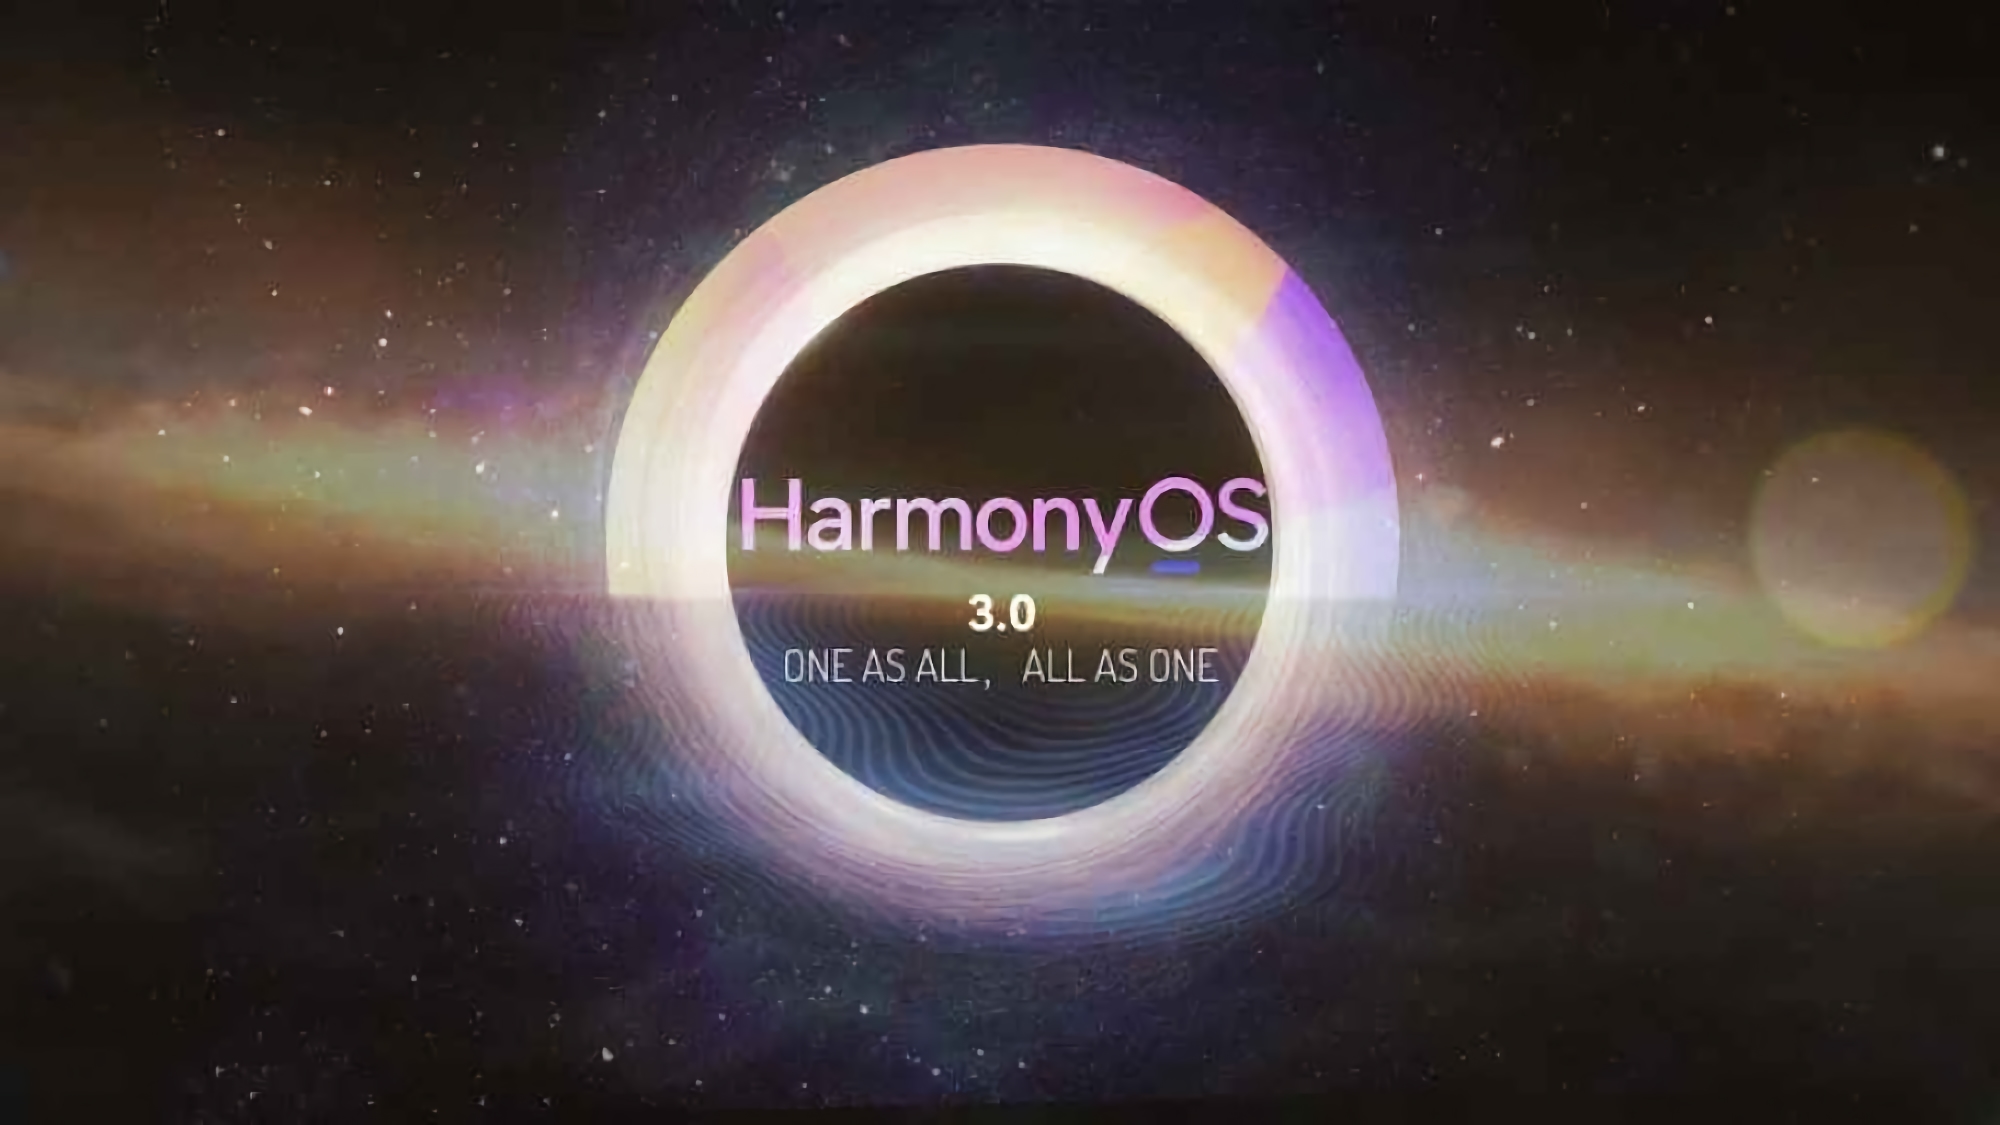 Huawei prepares for Harmony OS 3.0 release, it may be shown as early as this month